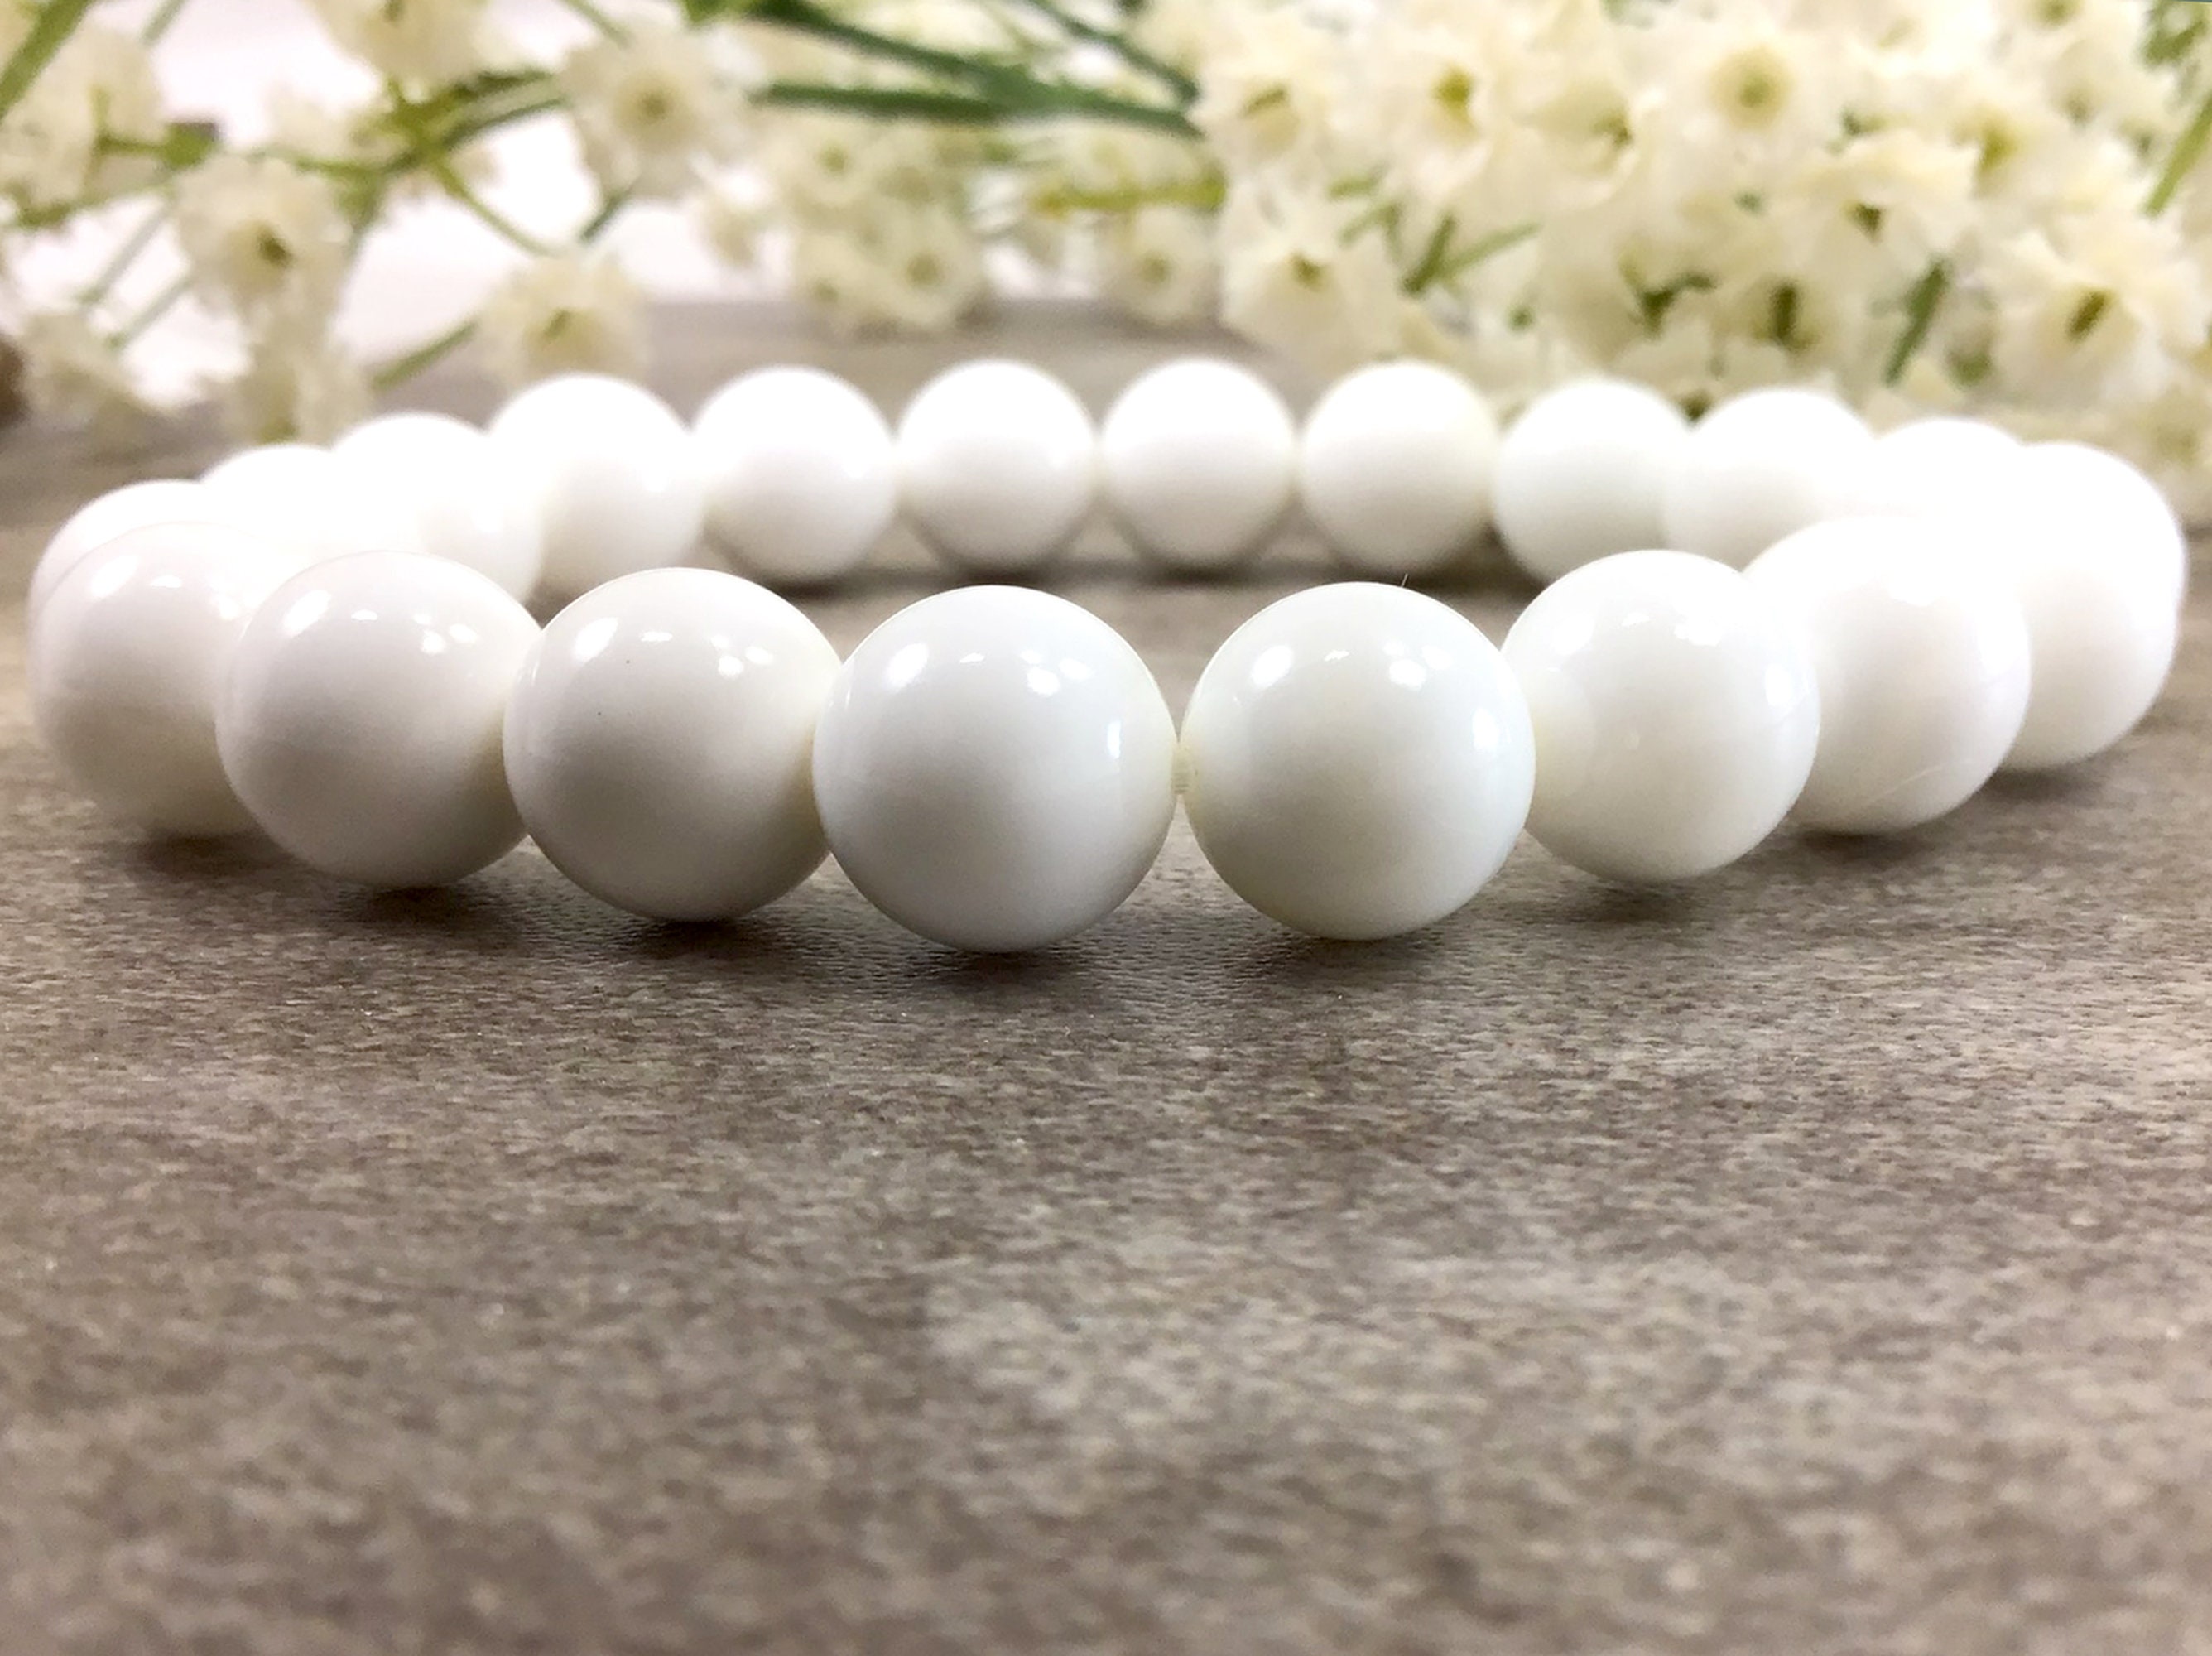 White Marble beaded bracelet with star charm 10mm, marble jewelry, healing  protection balancing calming stretch bracelet gift for women